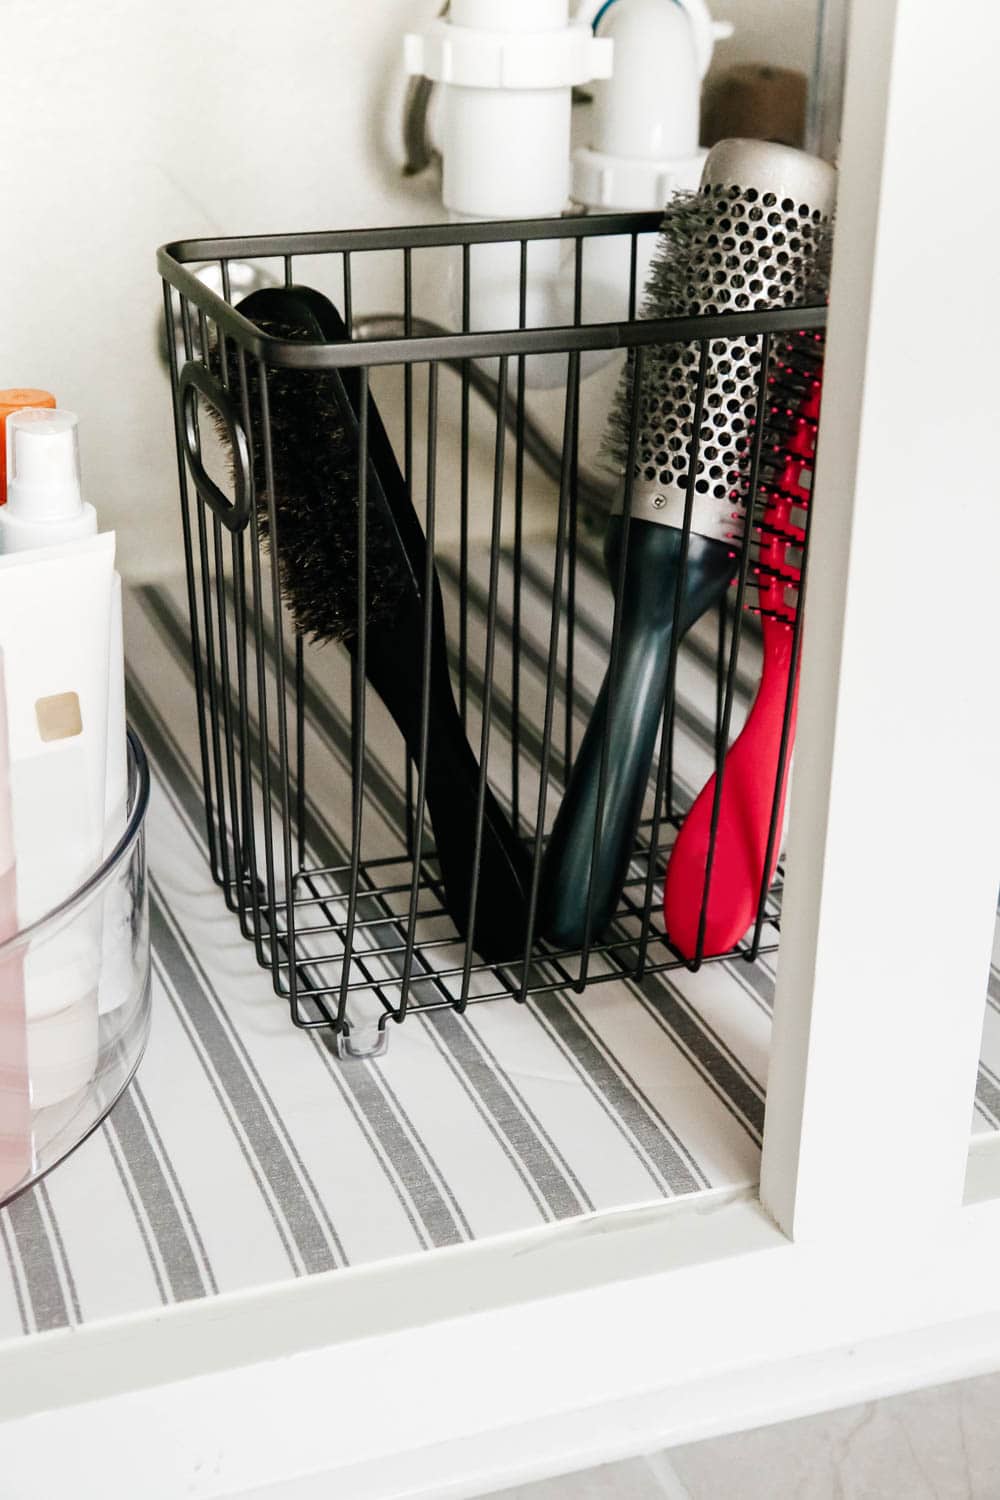 An easy hack to organize your bathroom cabinets and make them easy to clean + maintain to keep the clutter away.